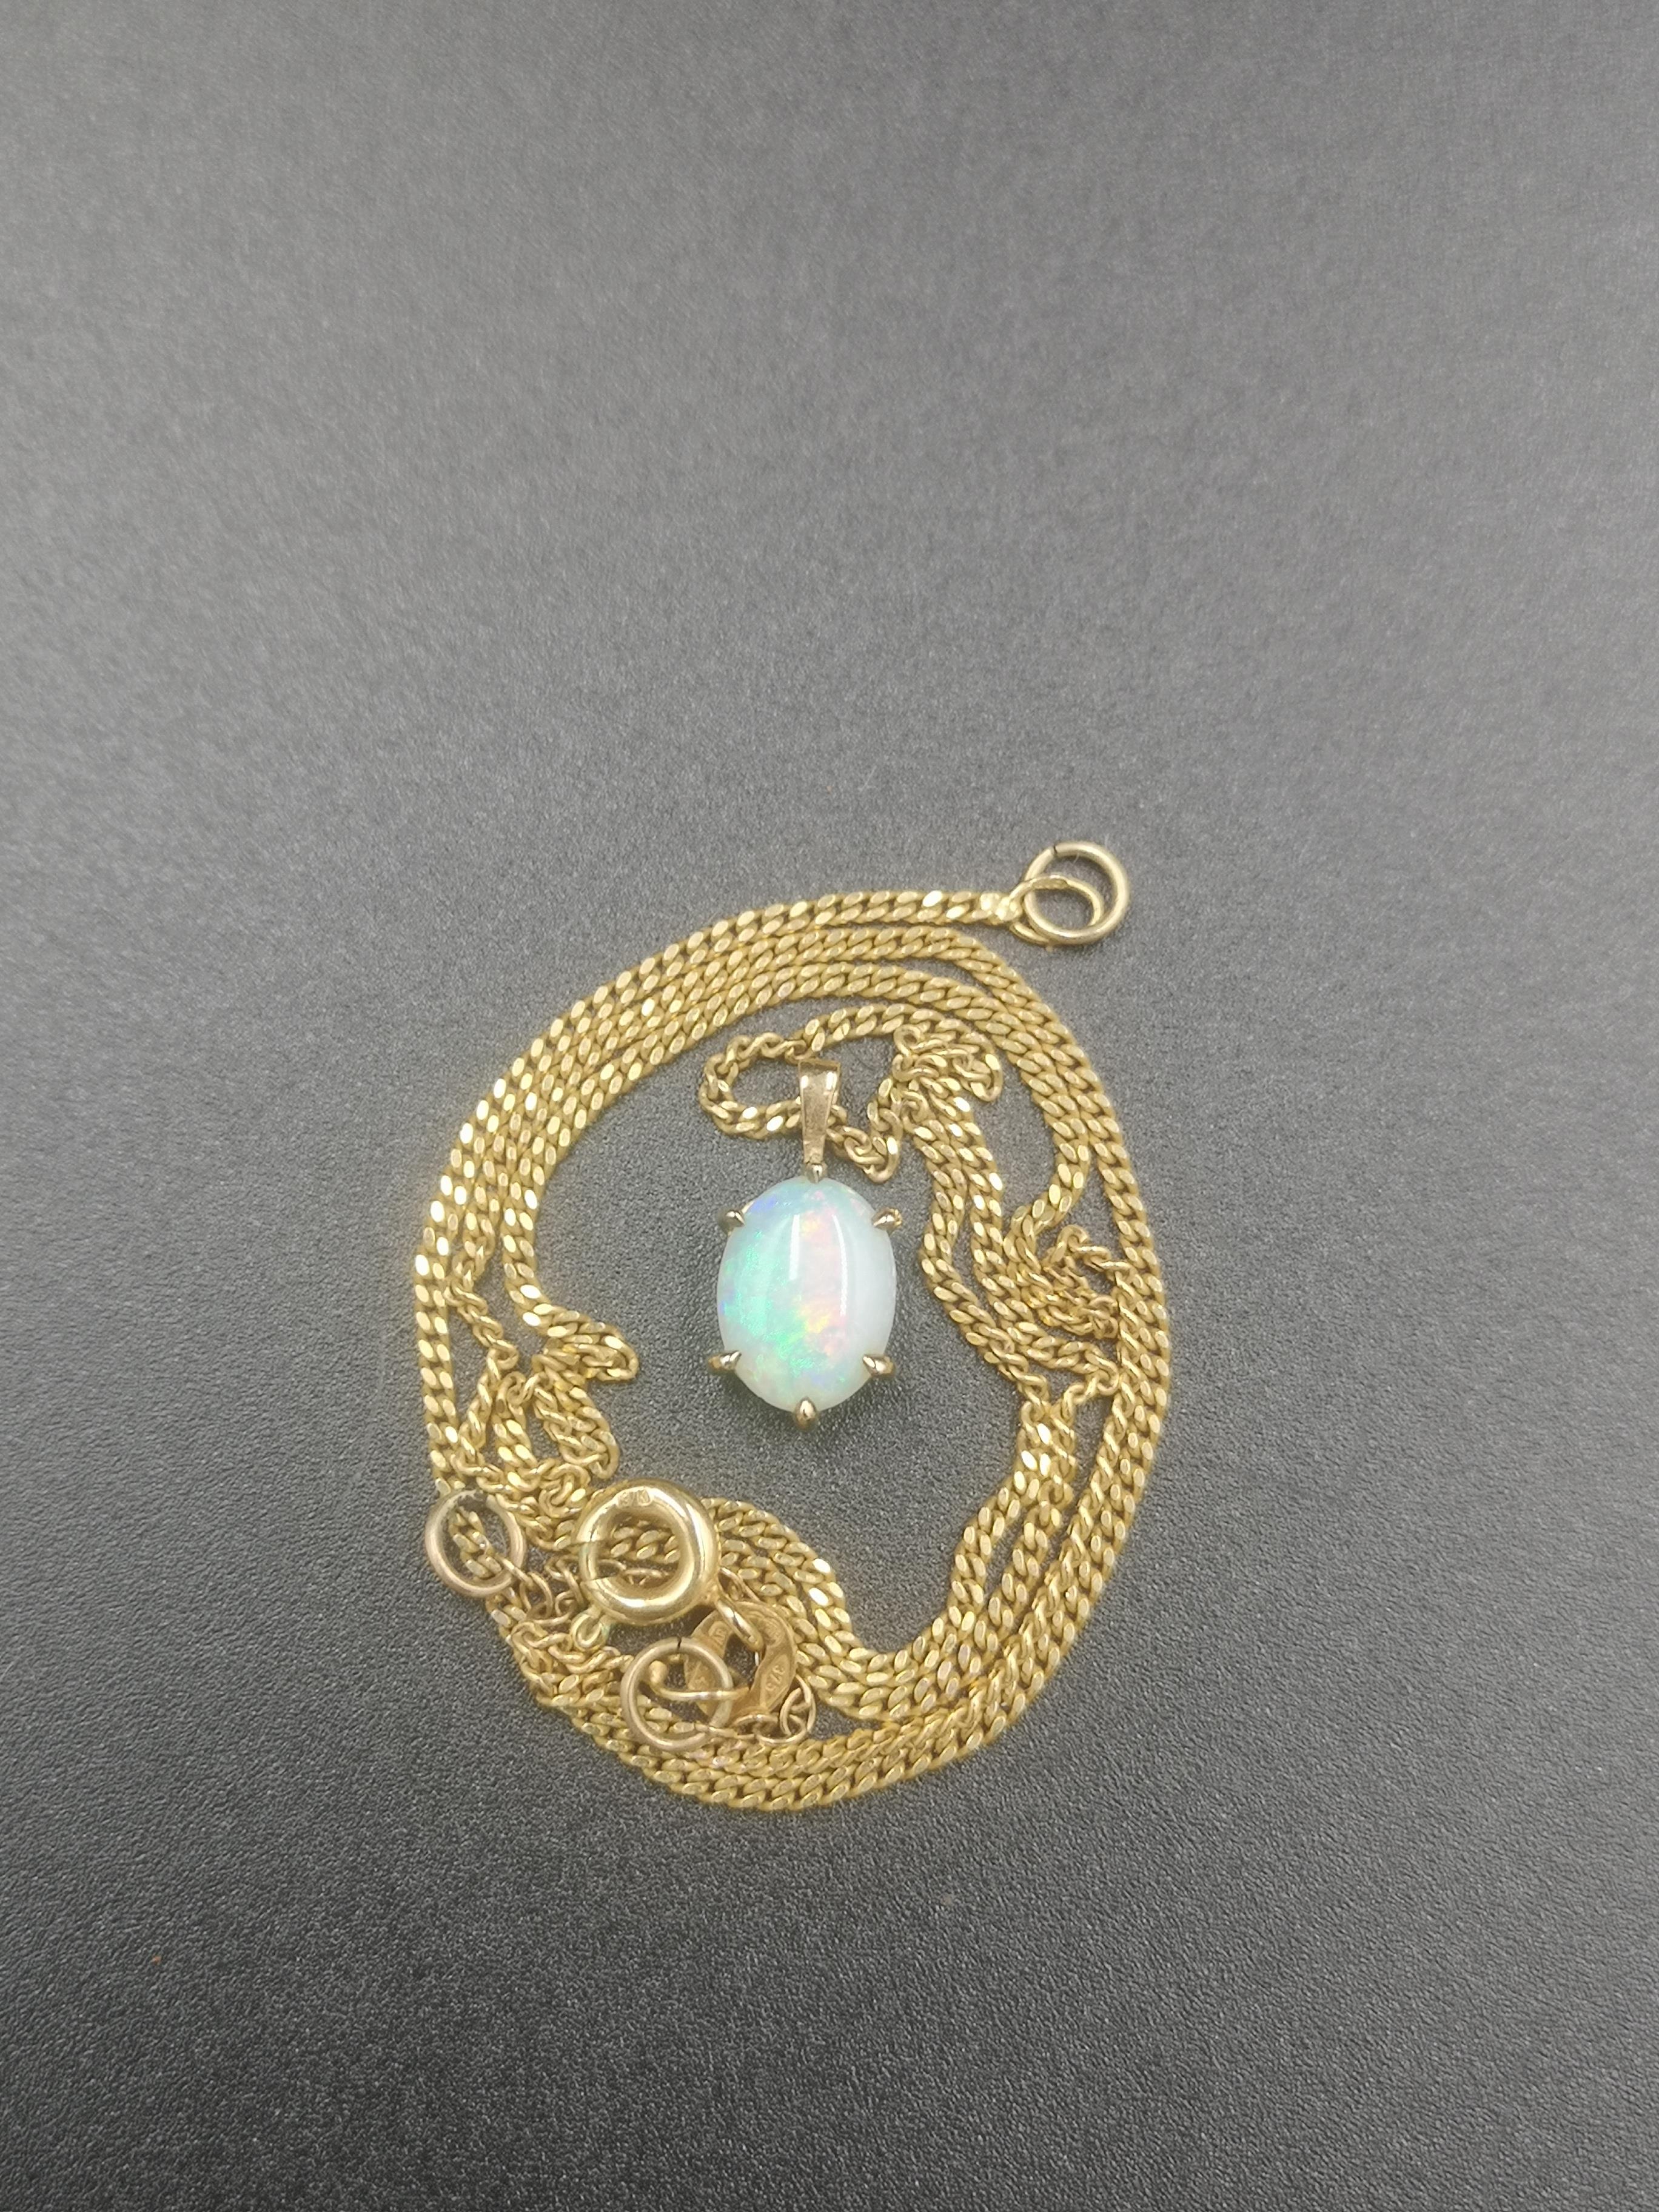 9ct gold necklace with 9ct and opal pendant